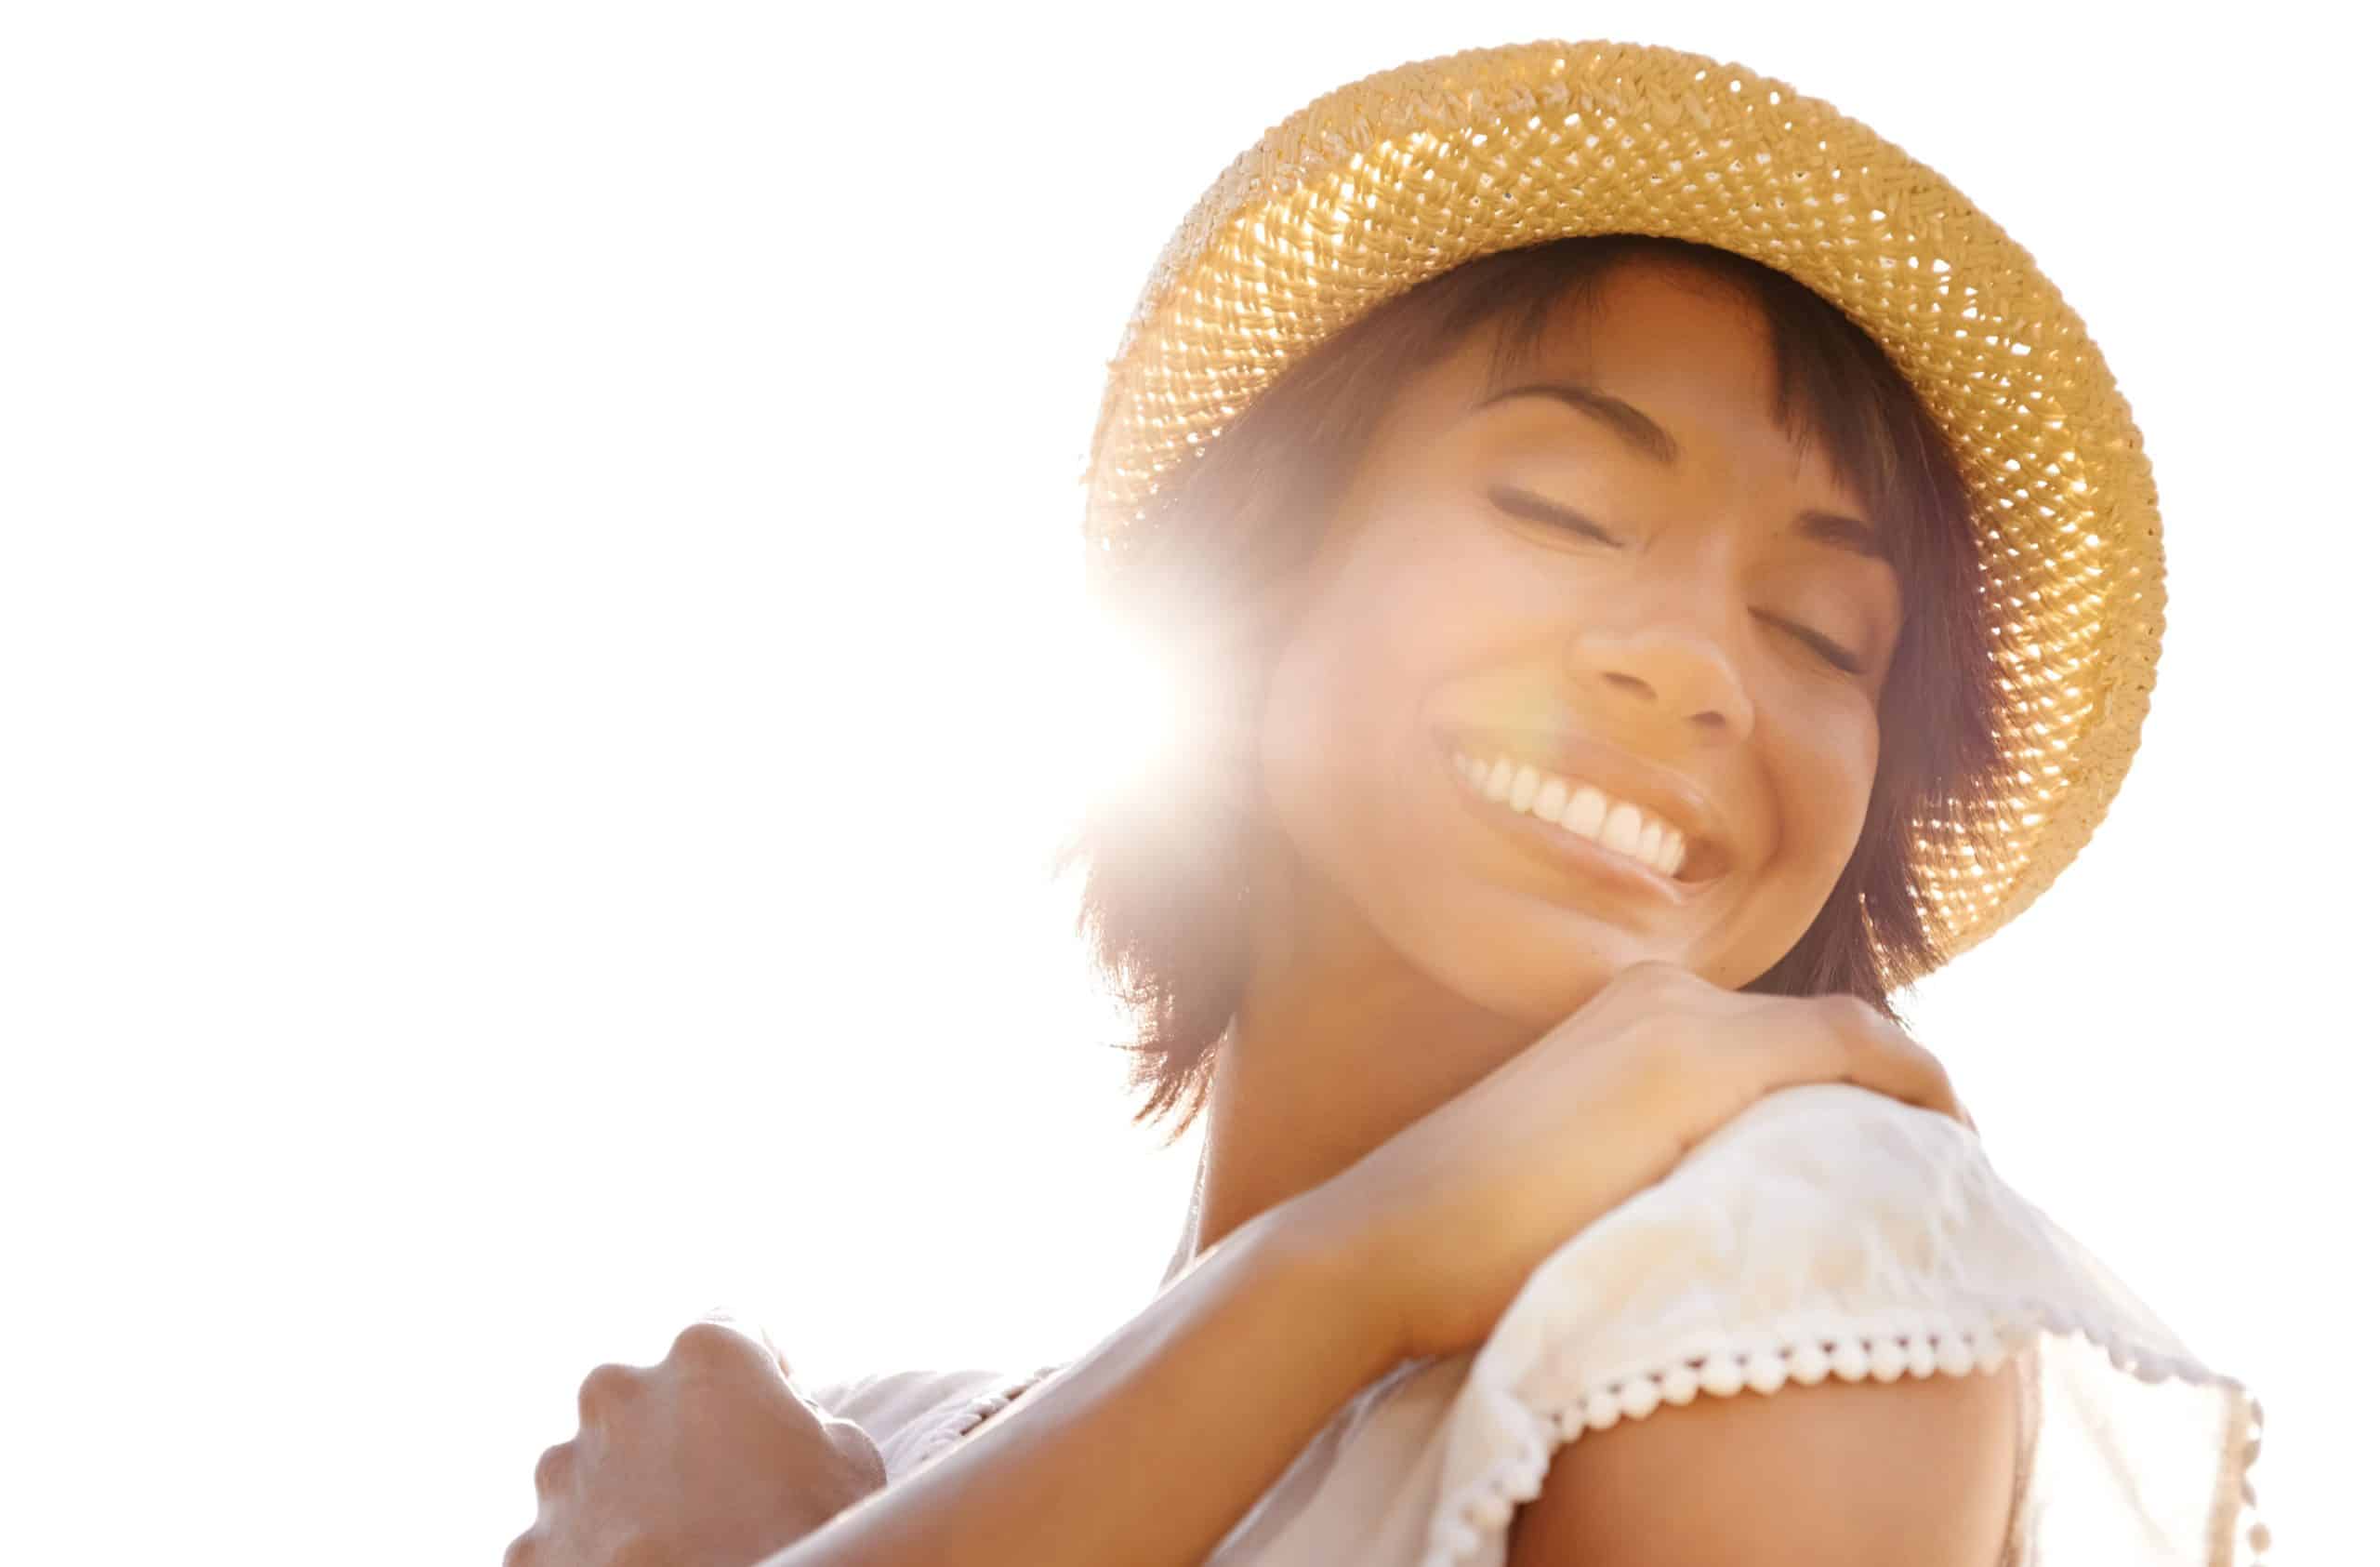 How to Harness the Best Health Benefits of Sunlight